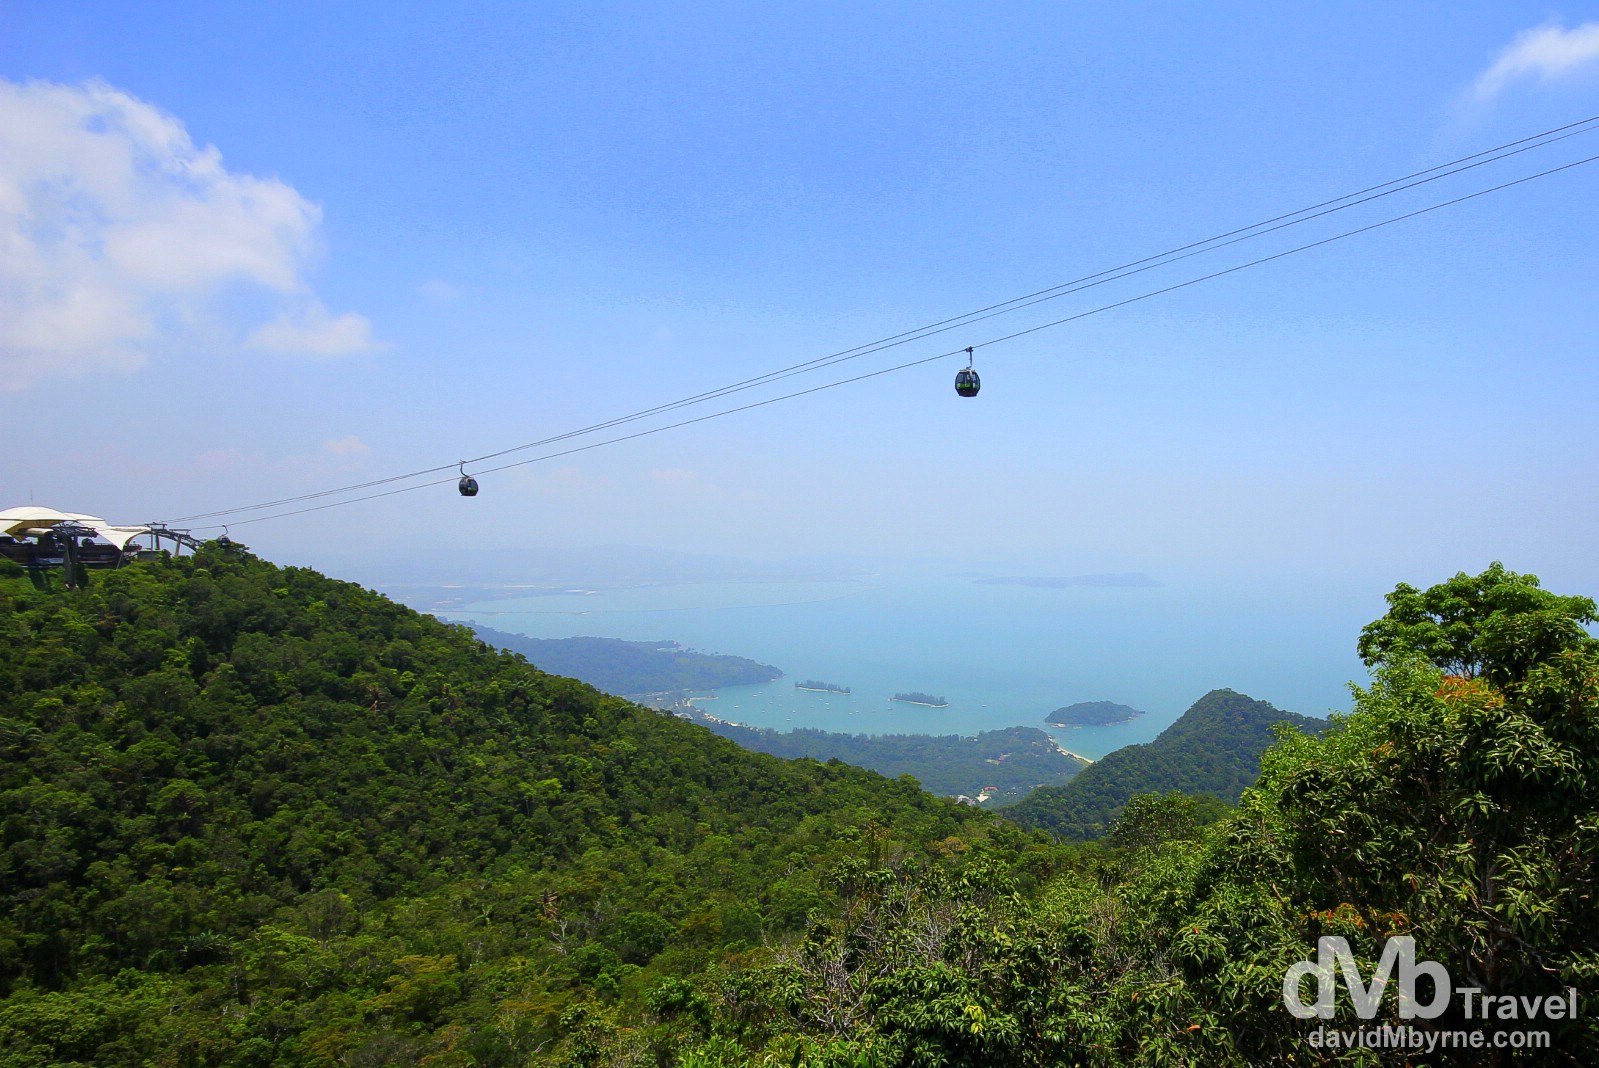 A shot of the west of Langkawi Island from the Top Station of the Langkawi Cable Car. The Cable Car, which opened in 2003, is 2.2km long, spans a section of the island’s Machincang mountain range & has 3 stations: Base, Middle (seen to the left, 650m above sea level) & Top (708m above sea level), above which is a viewing platform from where I took this picture. The visibility on this day was very poor - I had to crank the saturation in this & the next picture to show any kind of detail of the surrounding jungle-clad landscape & distant seascape. Gunung Machinchang, Langkawi Island, Malaysia. March 22nd 2012.